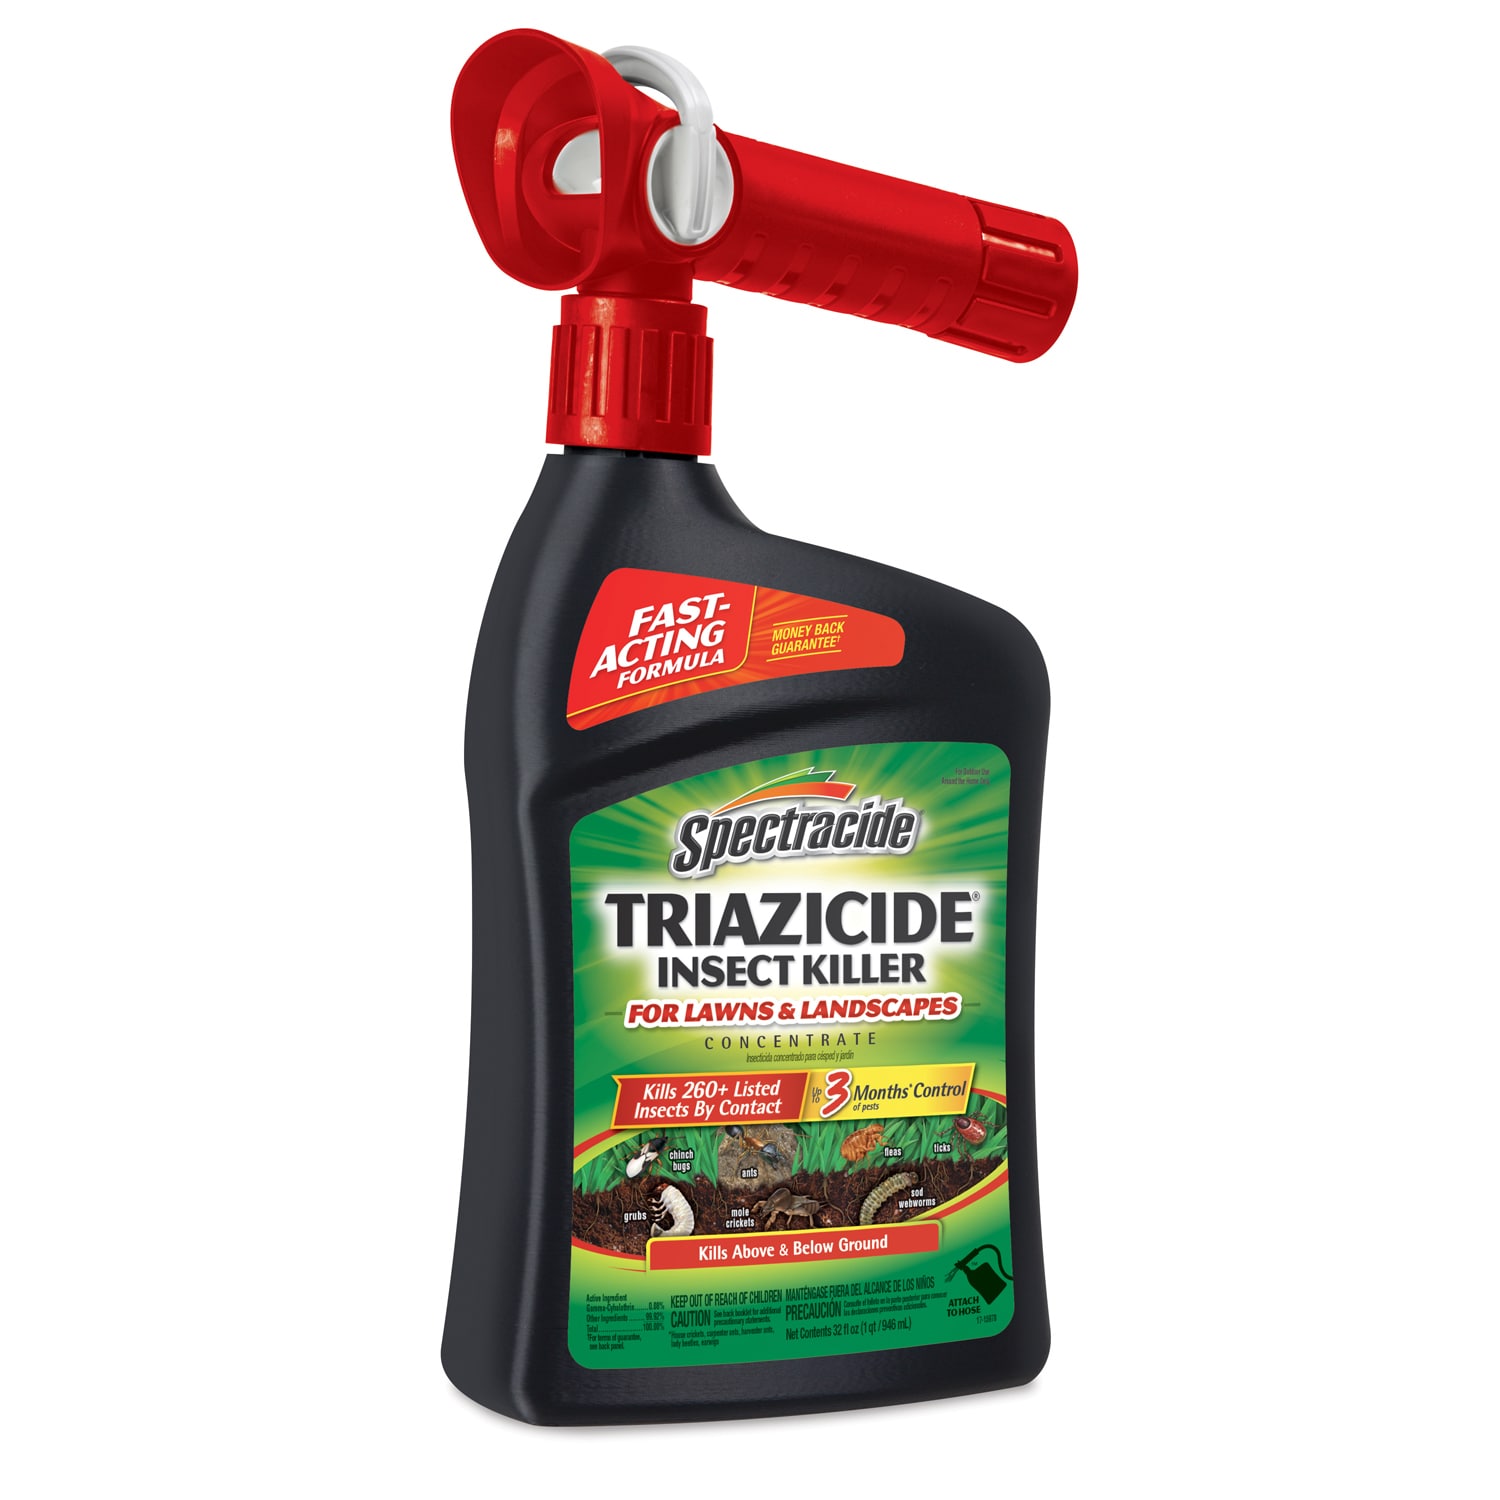 Spectracide Insect Killer, for Lawns & Landscapes, Concentrate - 32 fl oz